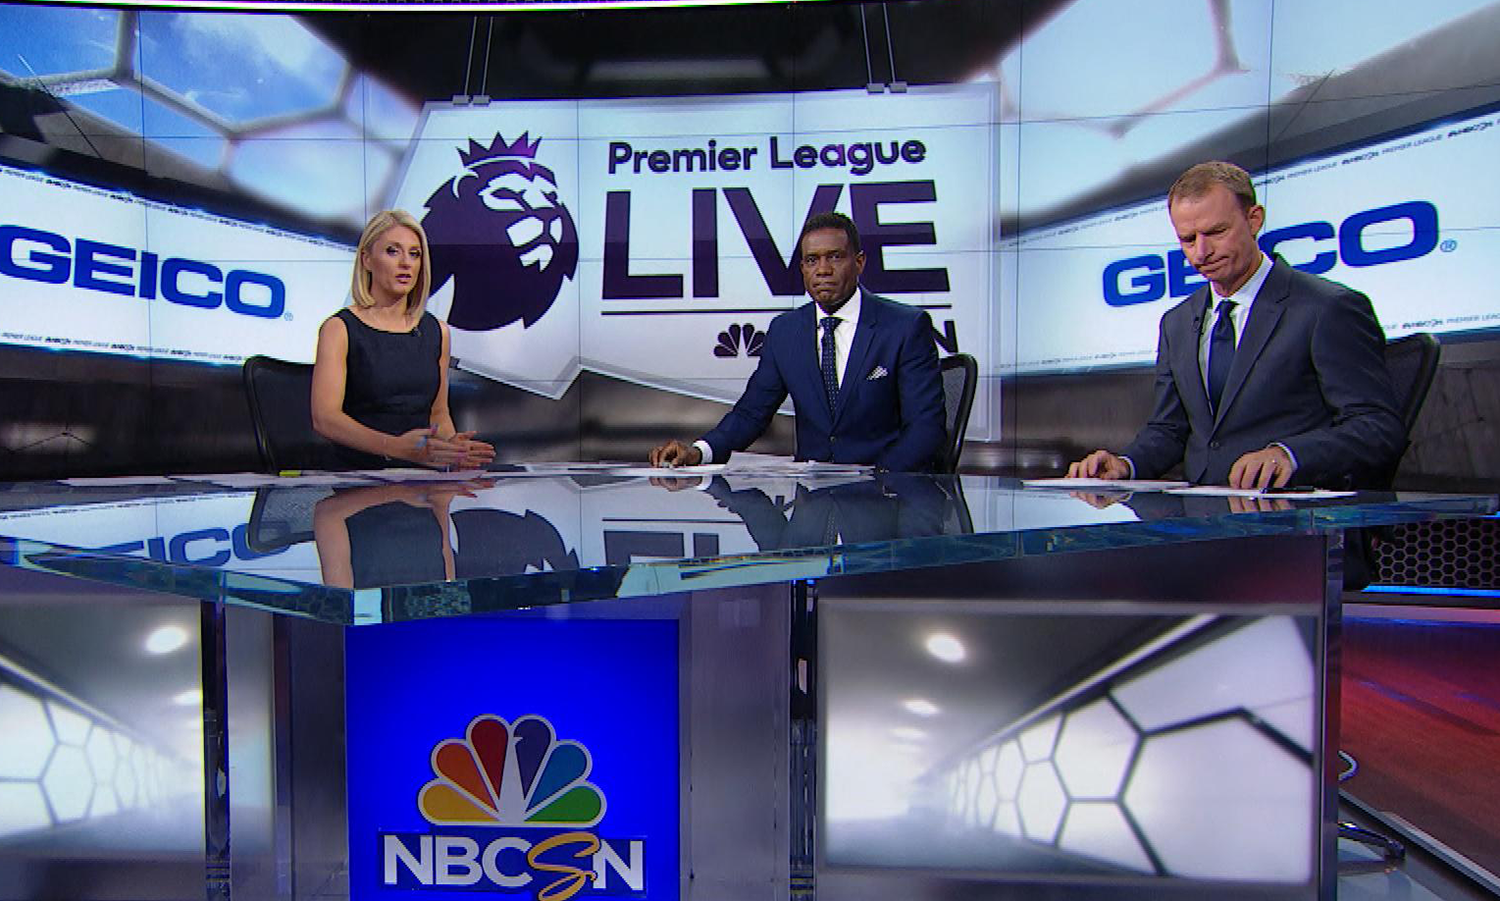 NBC Sports Group Retains Premier League Rights in the U.S